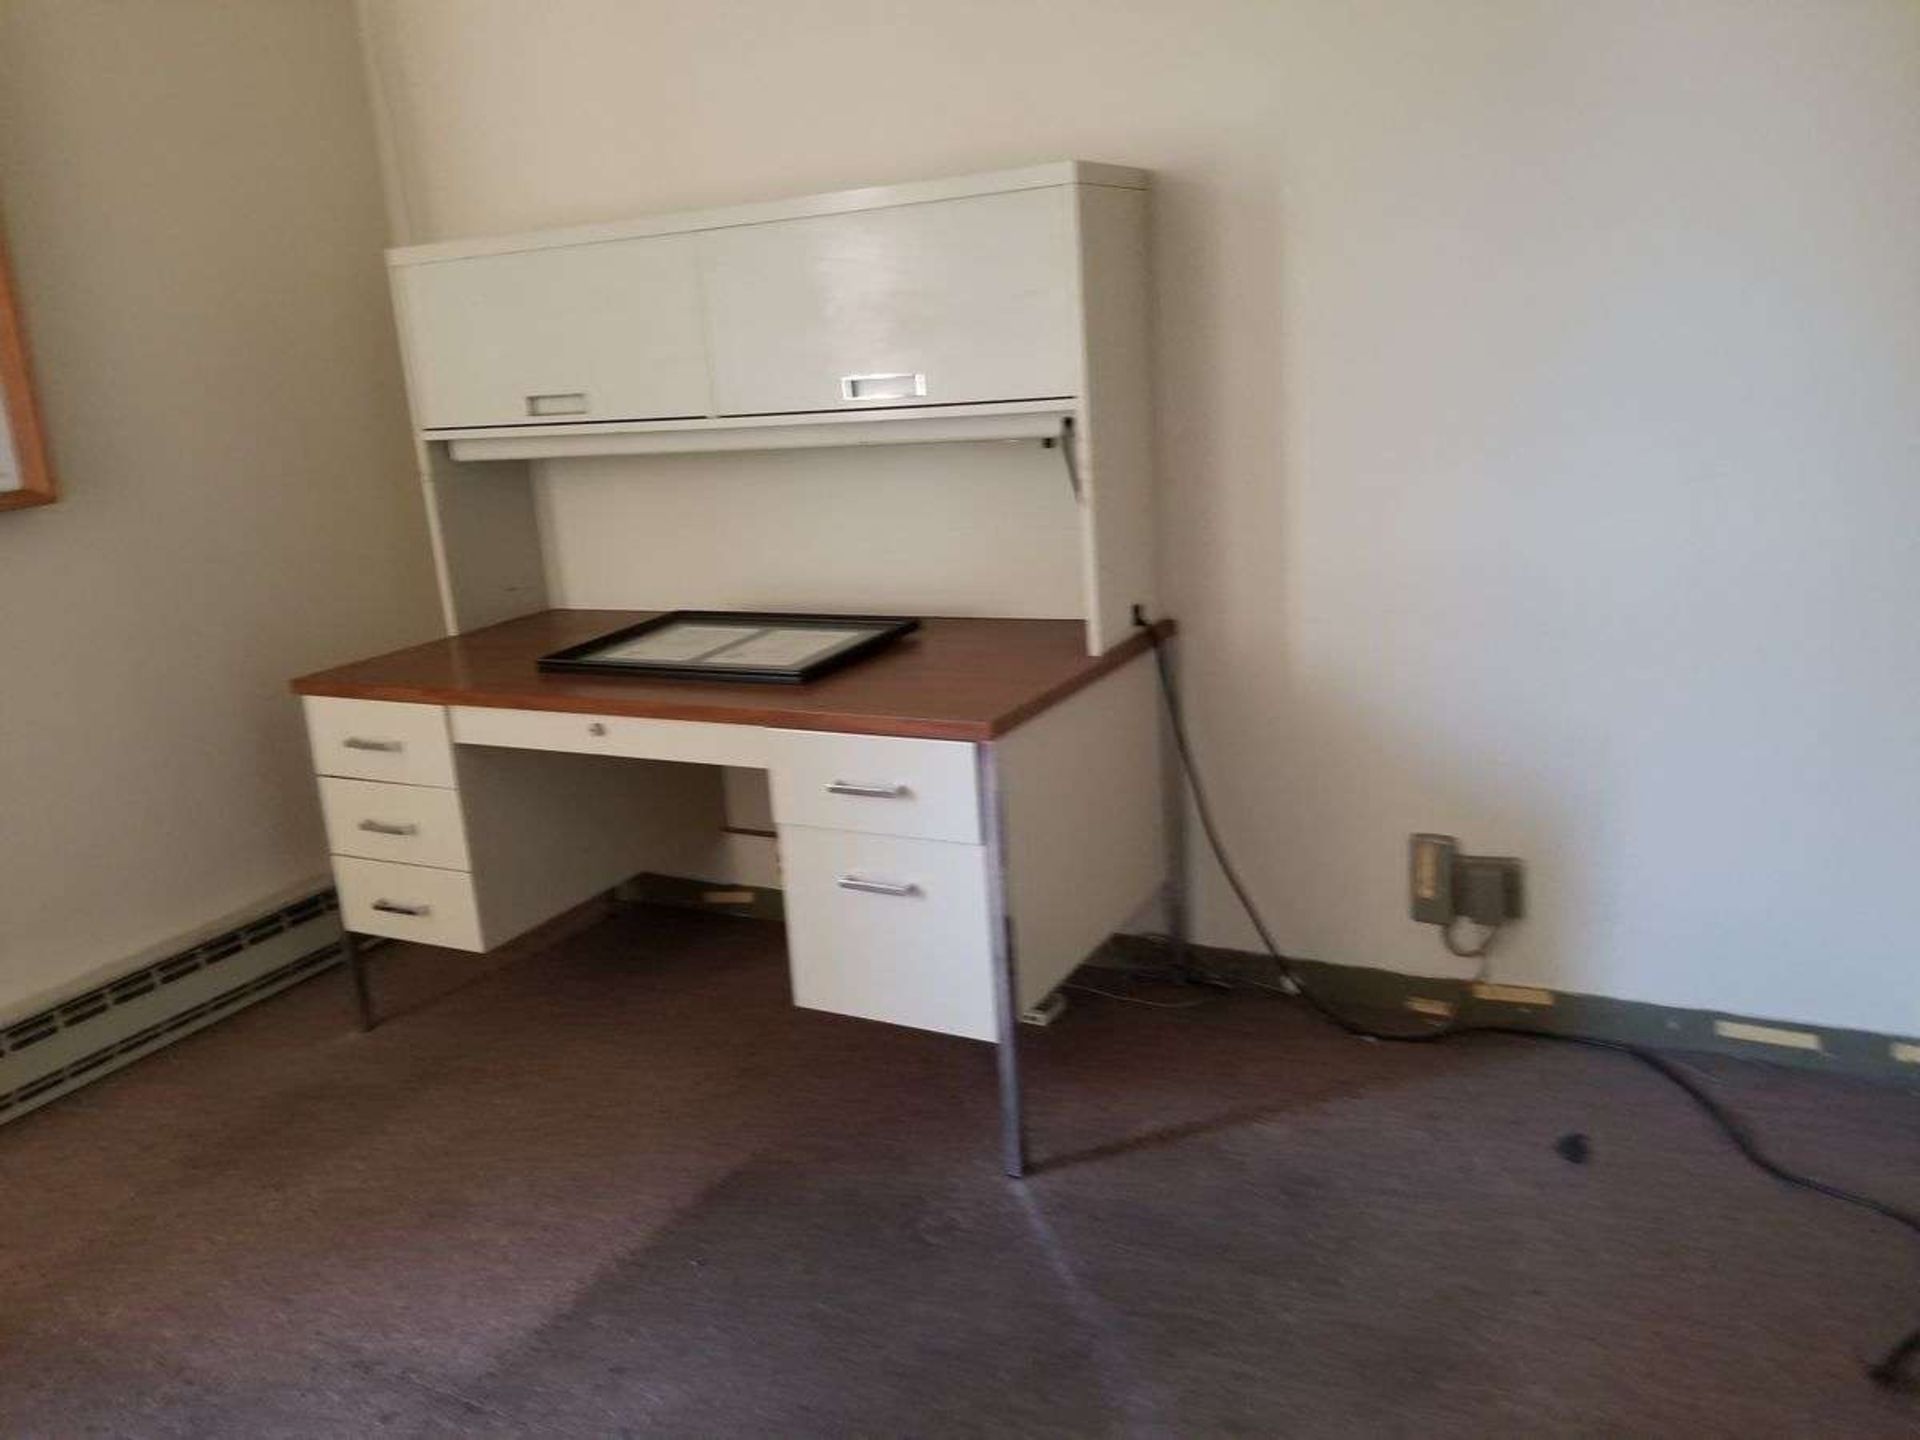 Office Furniture - Image 17 of 18